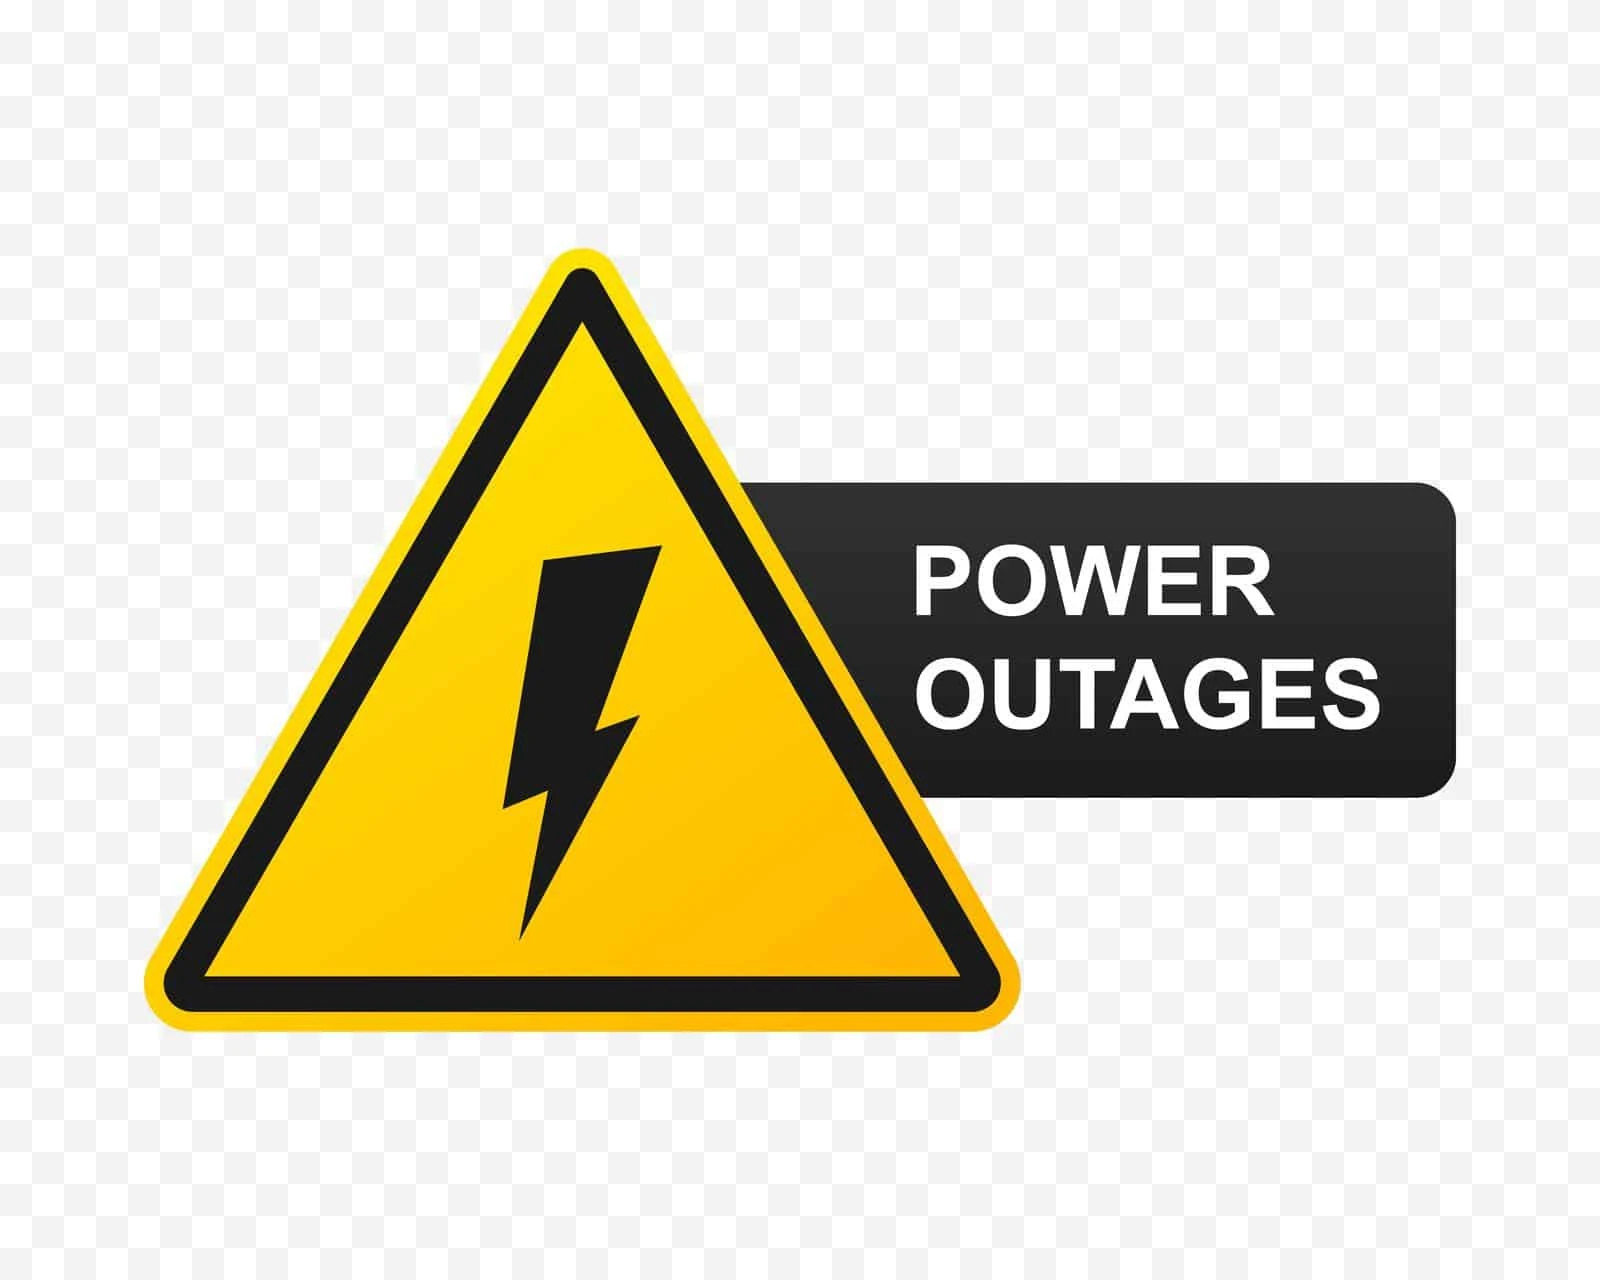 power-outages-banner-symbol-isolated-on-transparent-background-power-outages-icon-vector-eps-10